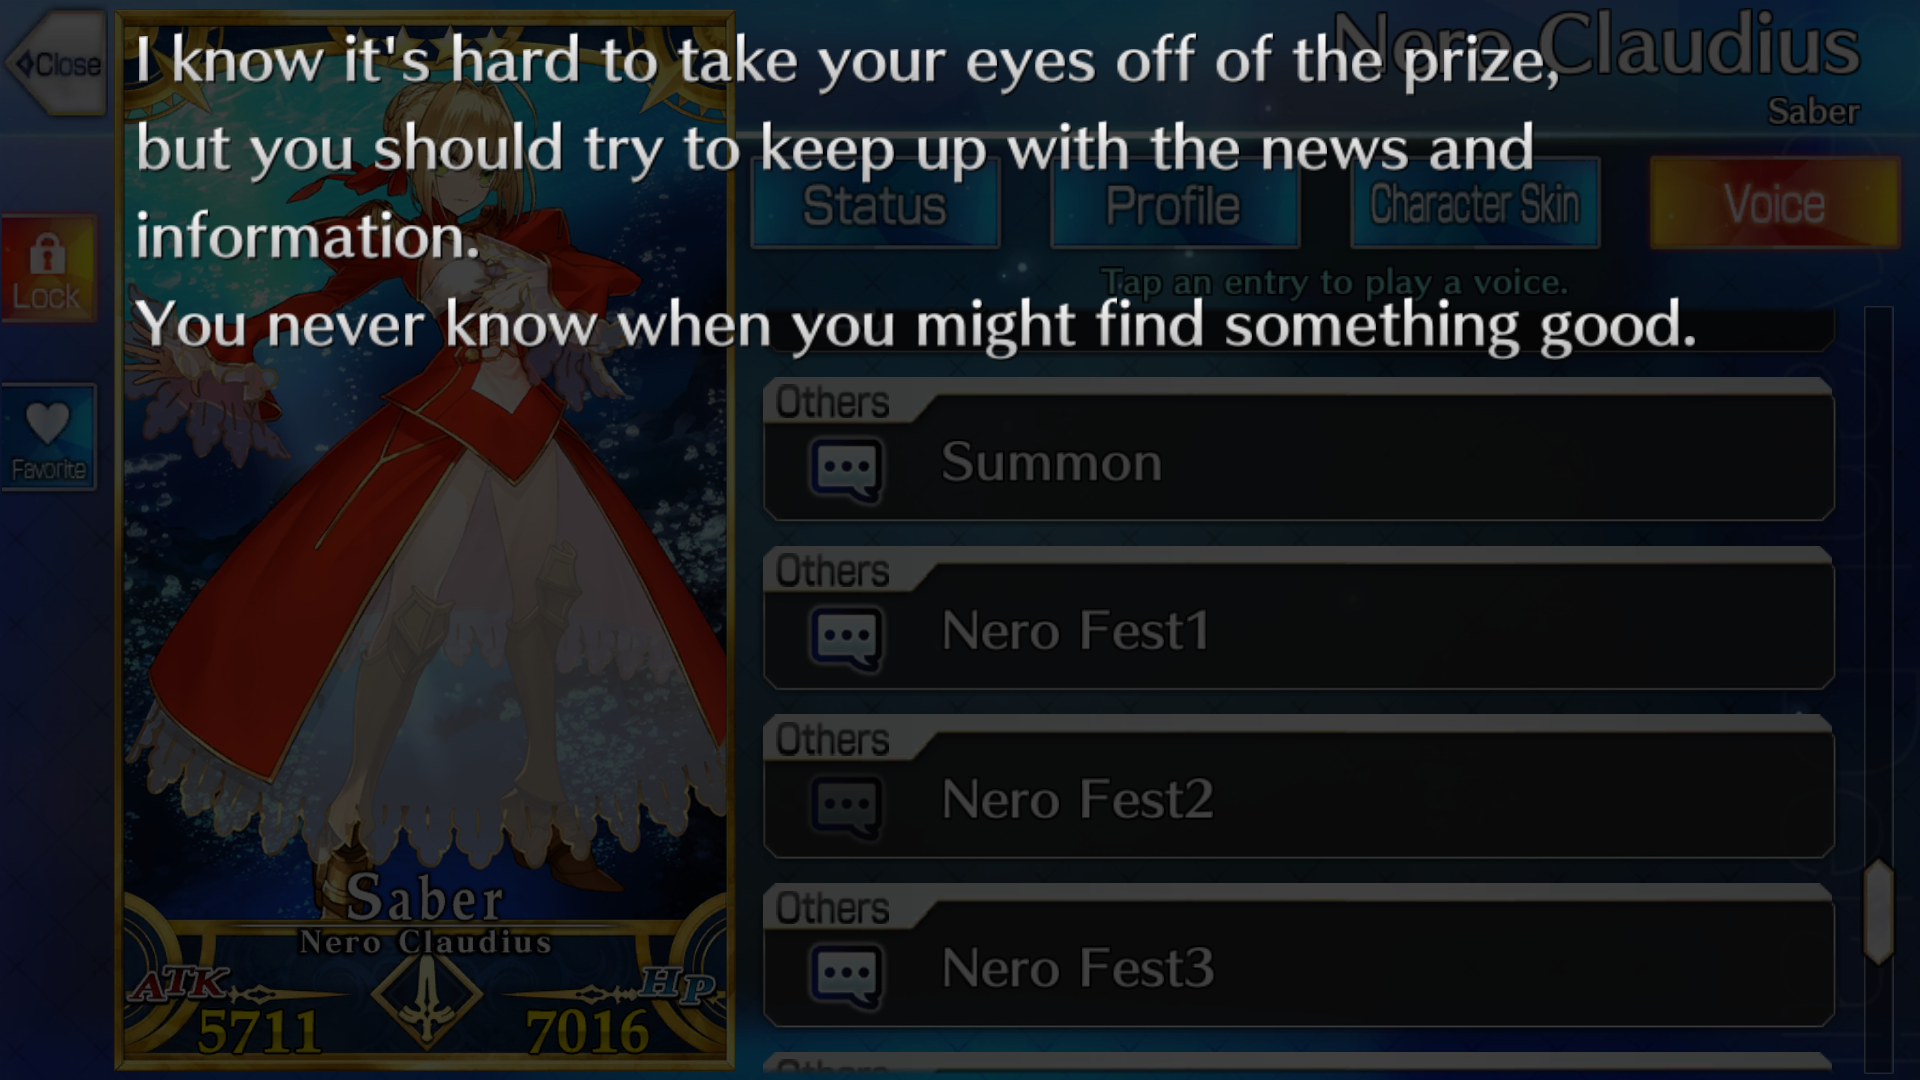 Nero!  Please include your subtitles in your shop too!